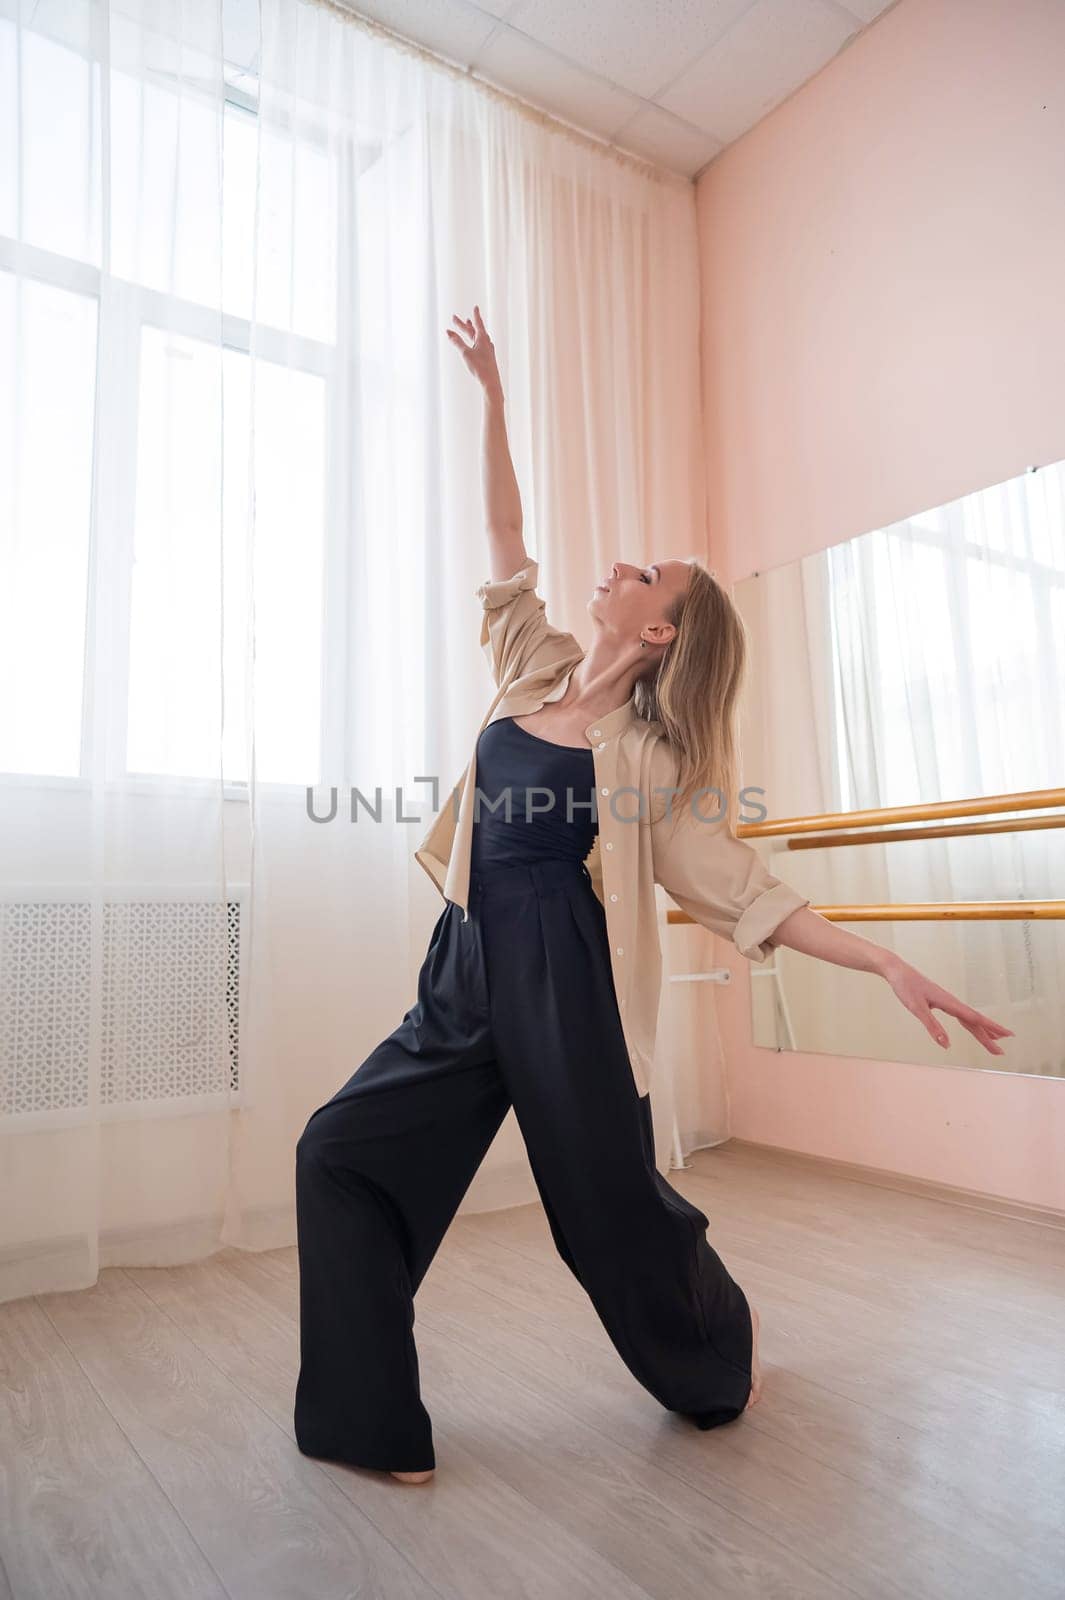 Caucasian woman dancing contemporary in ballet class. Rehearsal. Vertical photo. by mrwed54